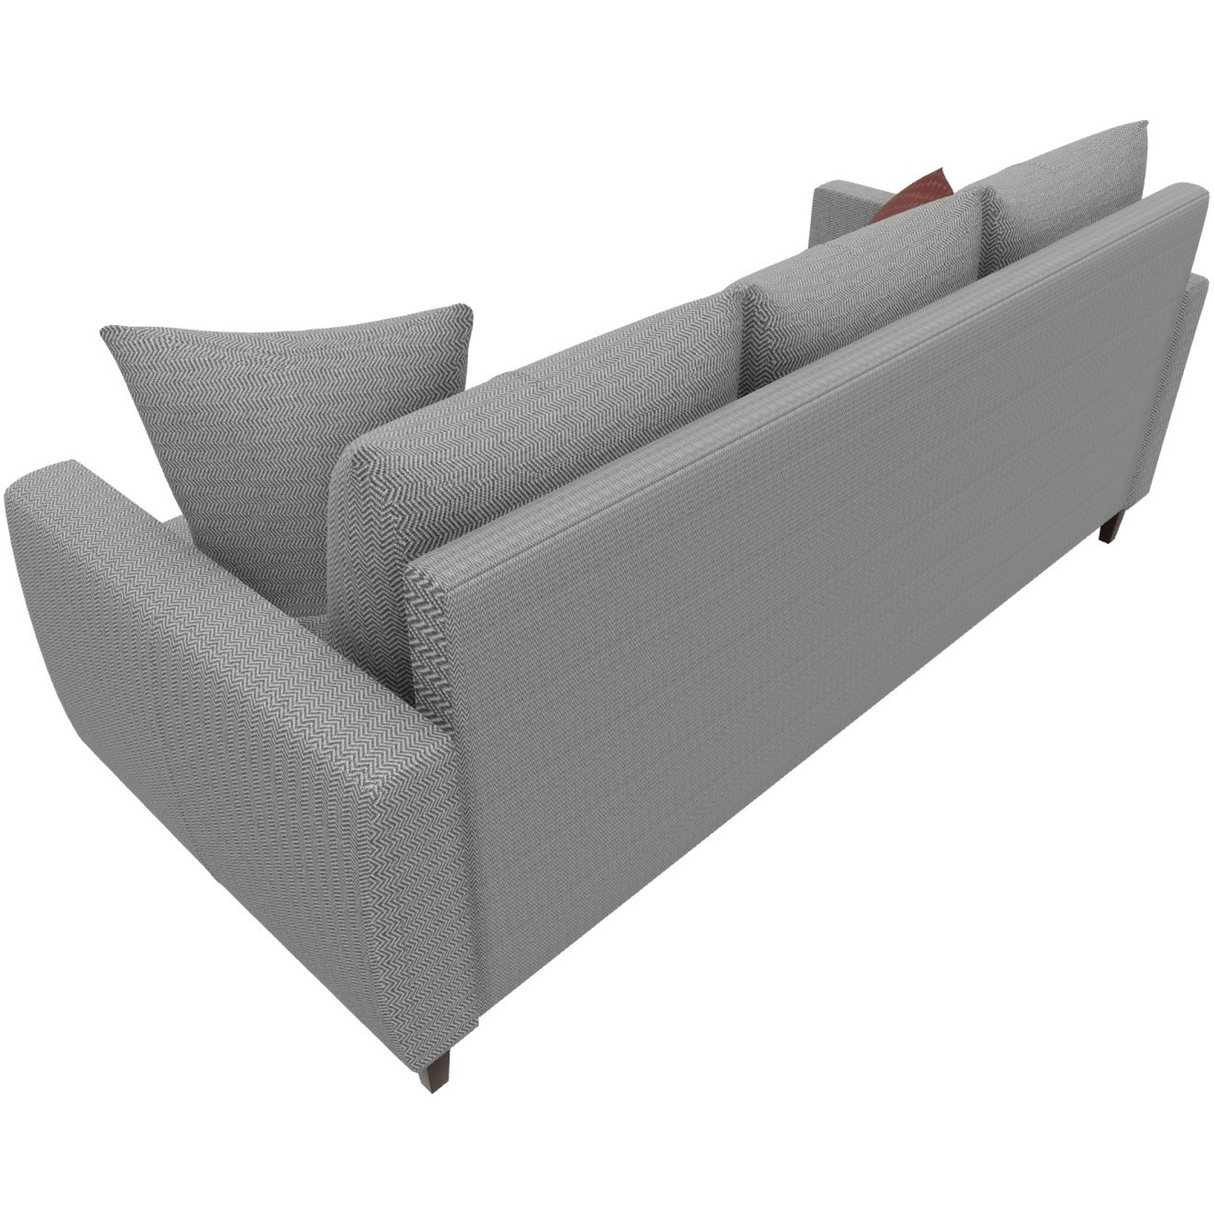 Sofa bed With Storage